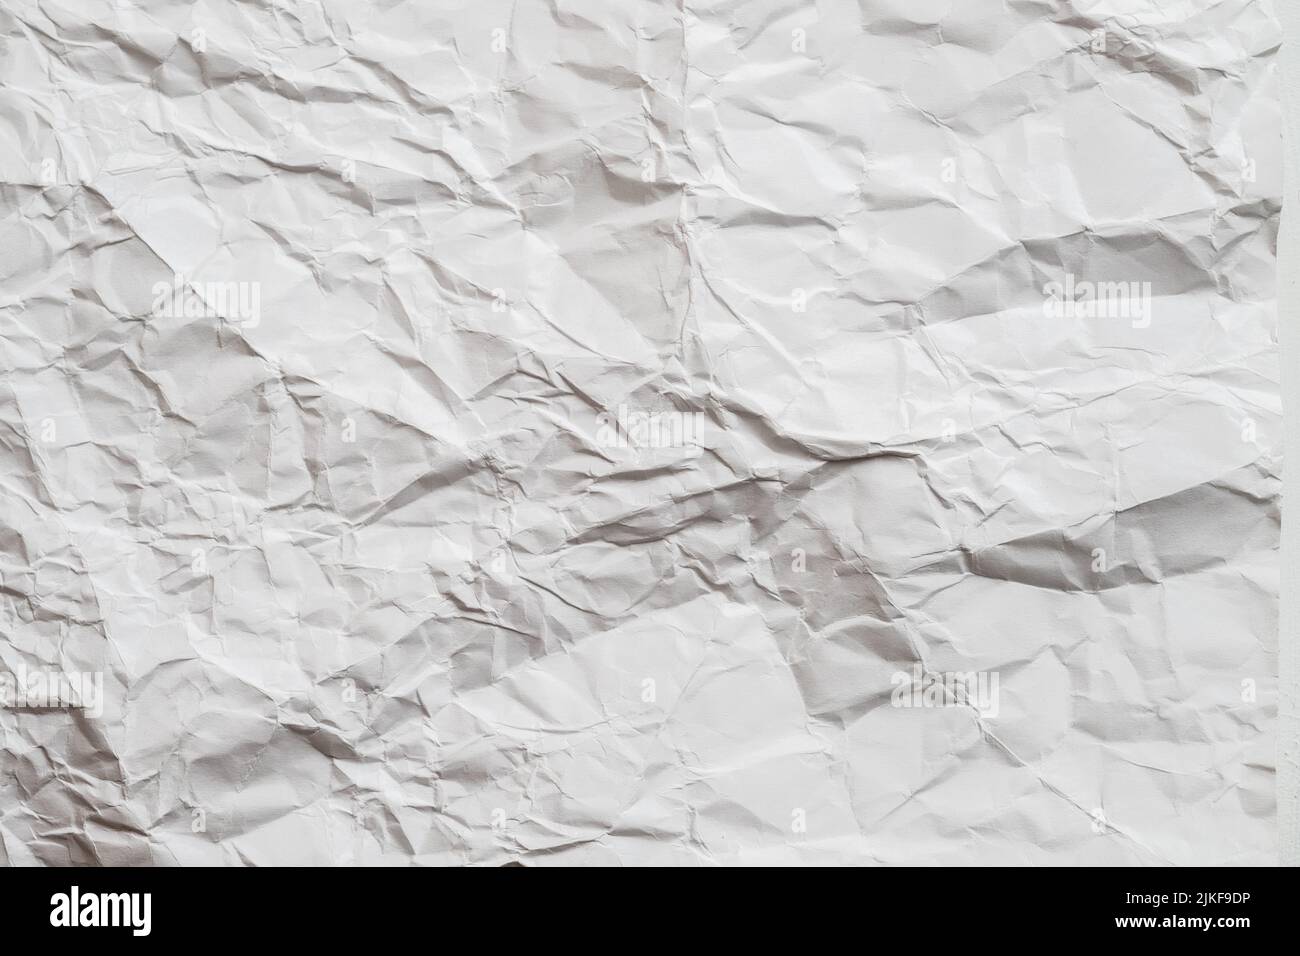 gray wrinkled paper waste recycling background Stock Photo